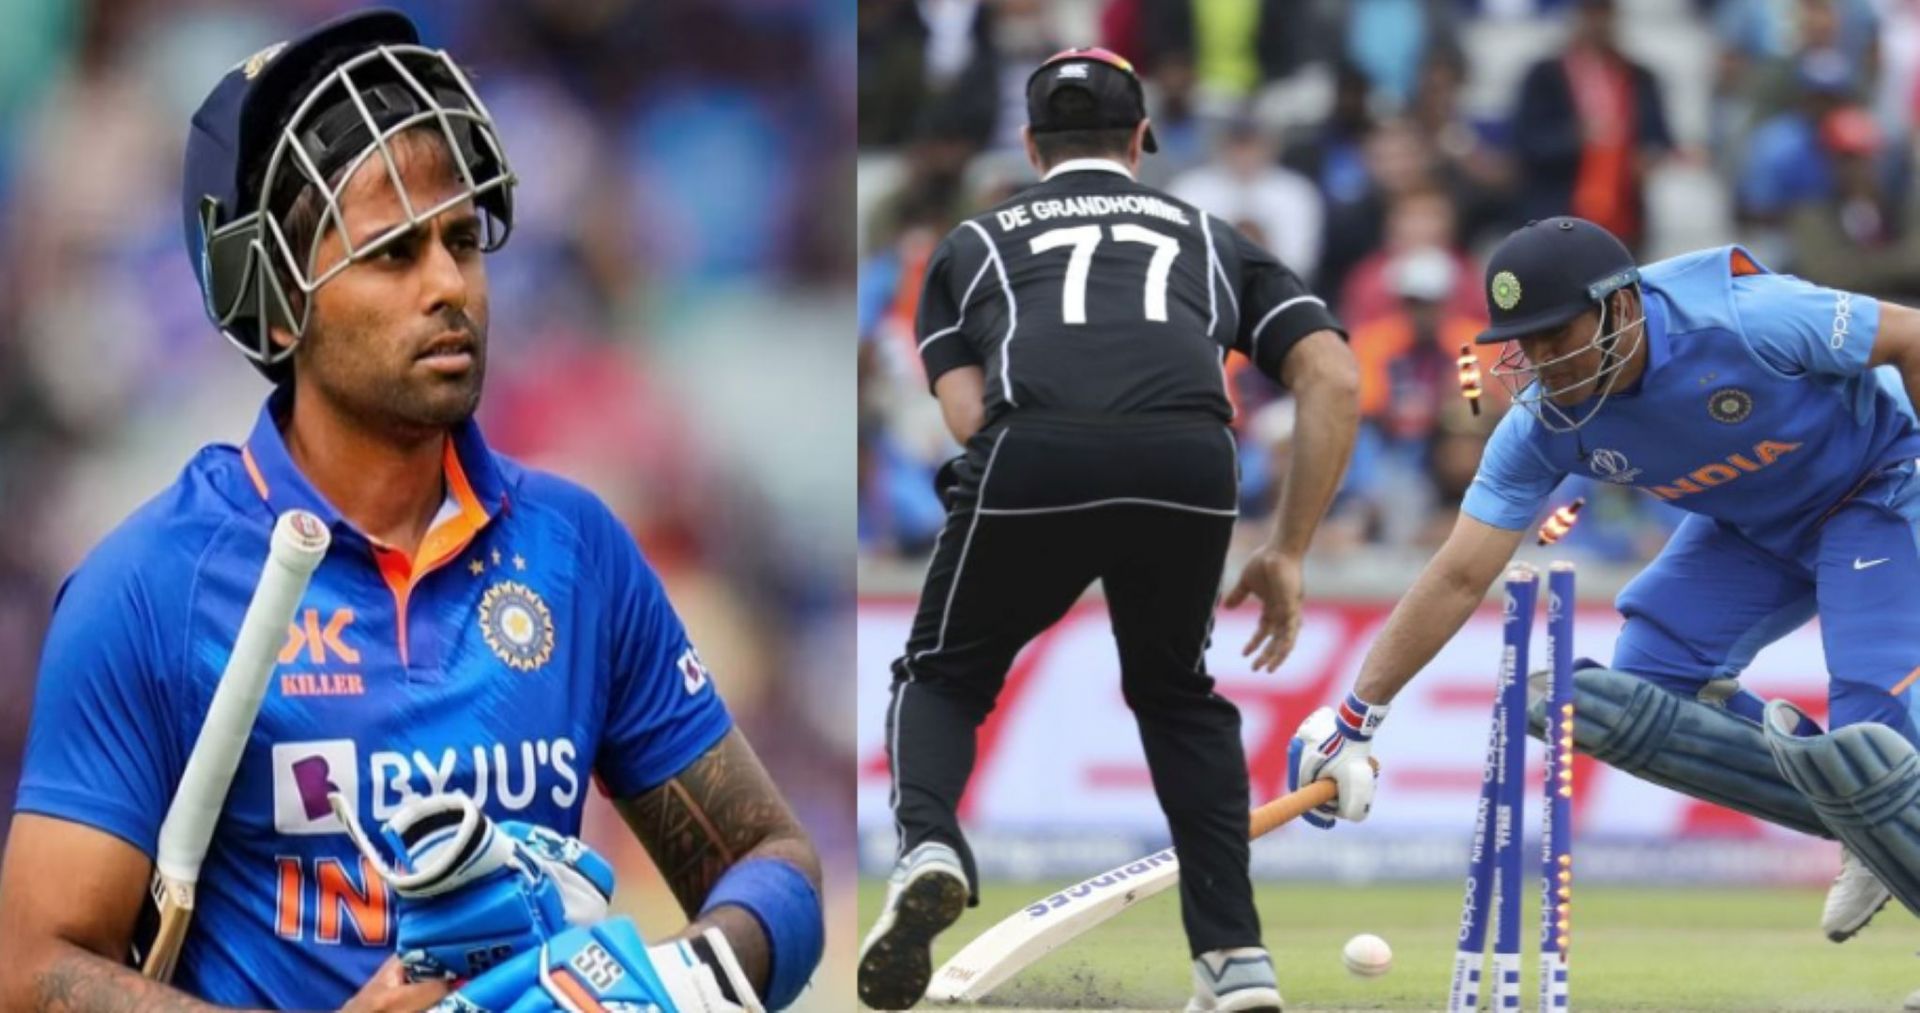 Team India has suffered several heartbreaks in the knockout stages recently